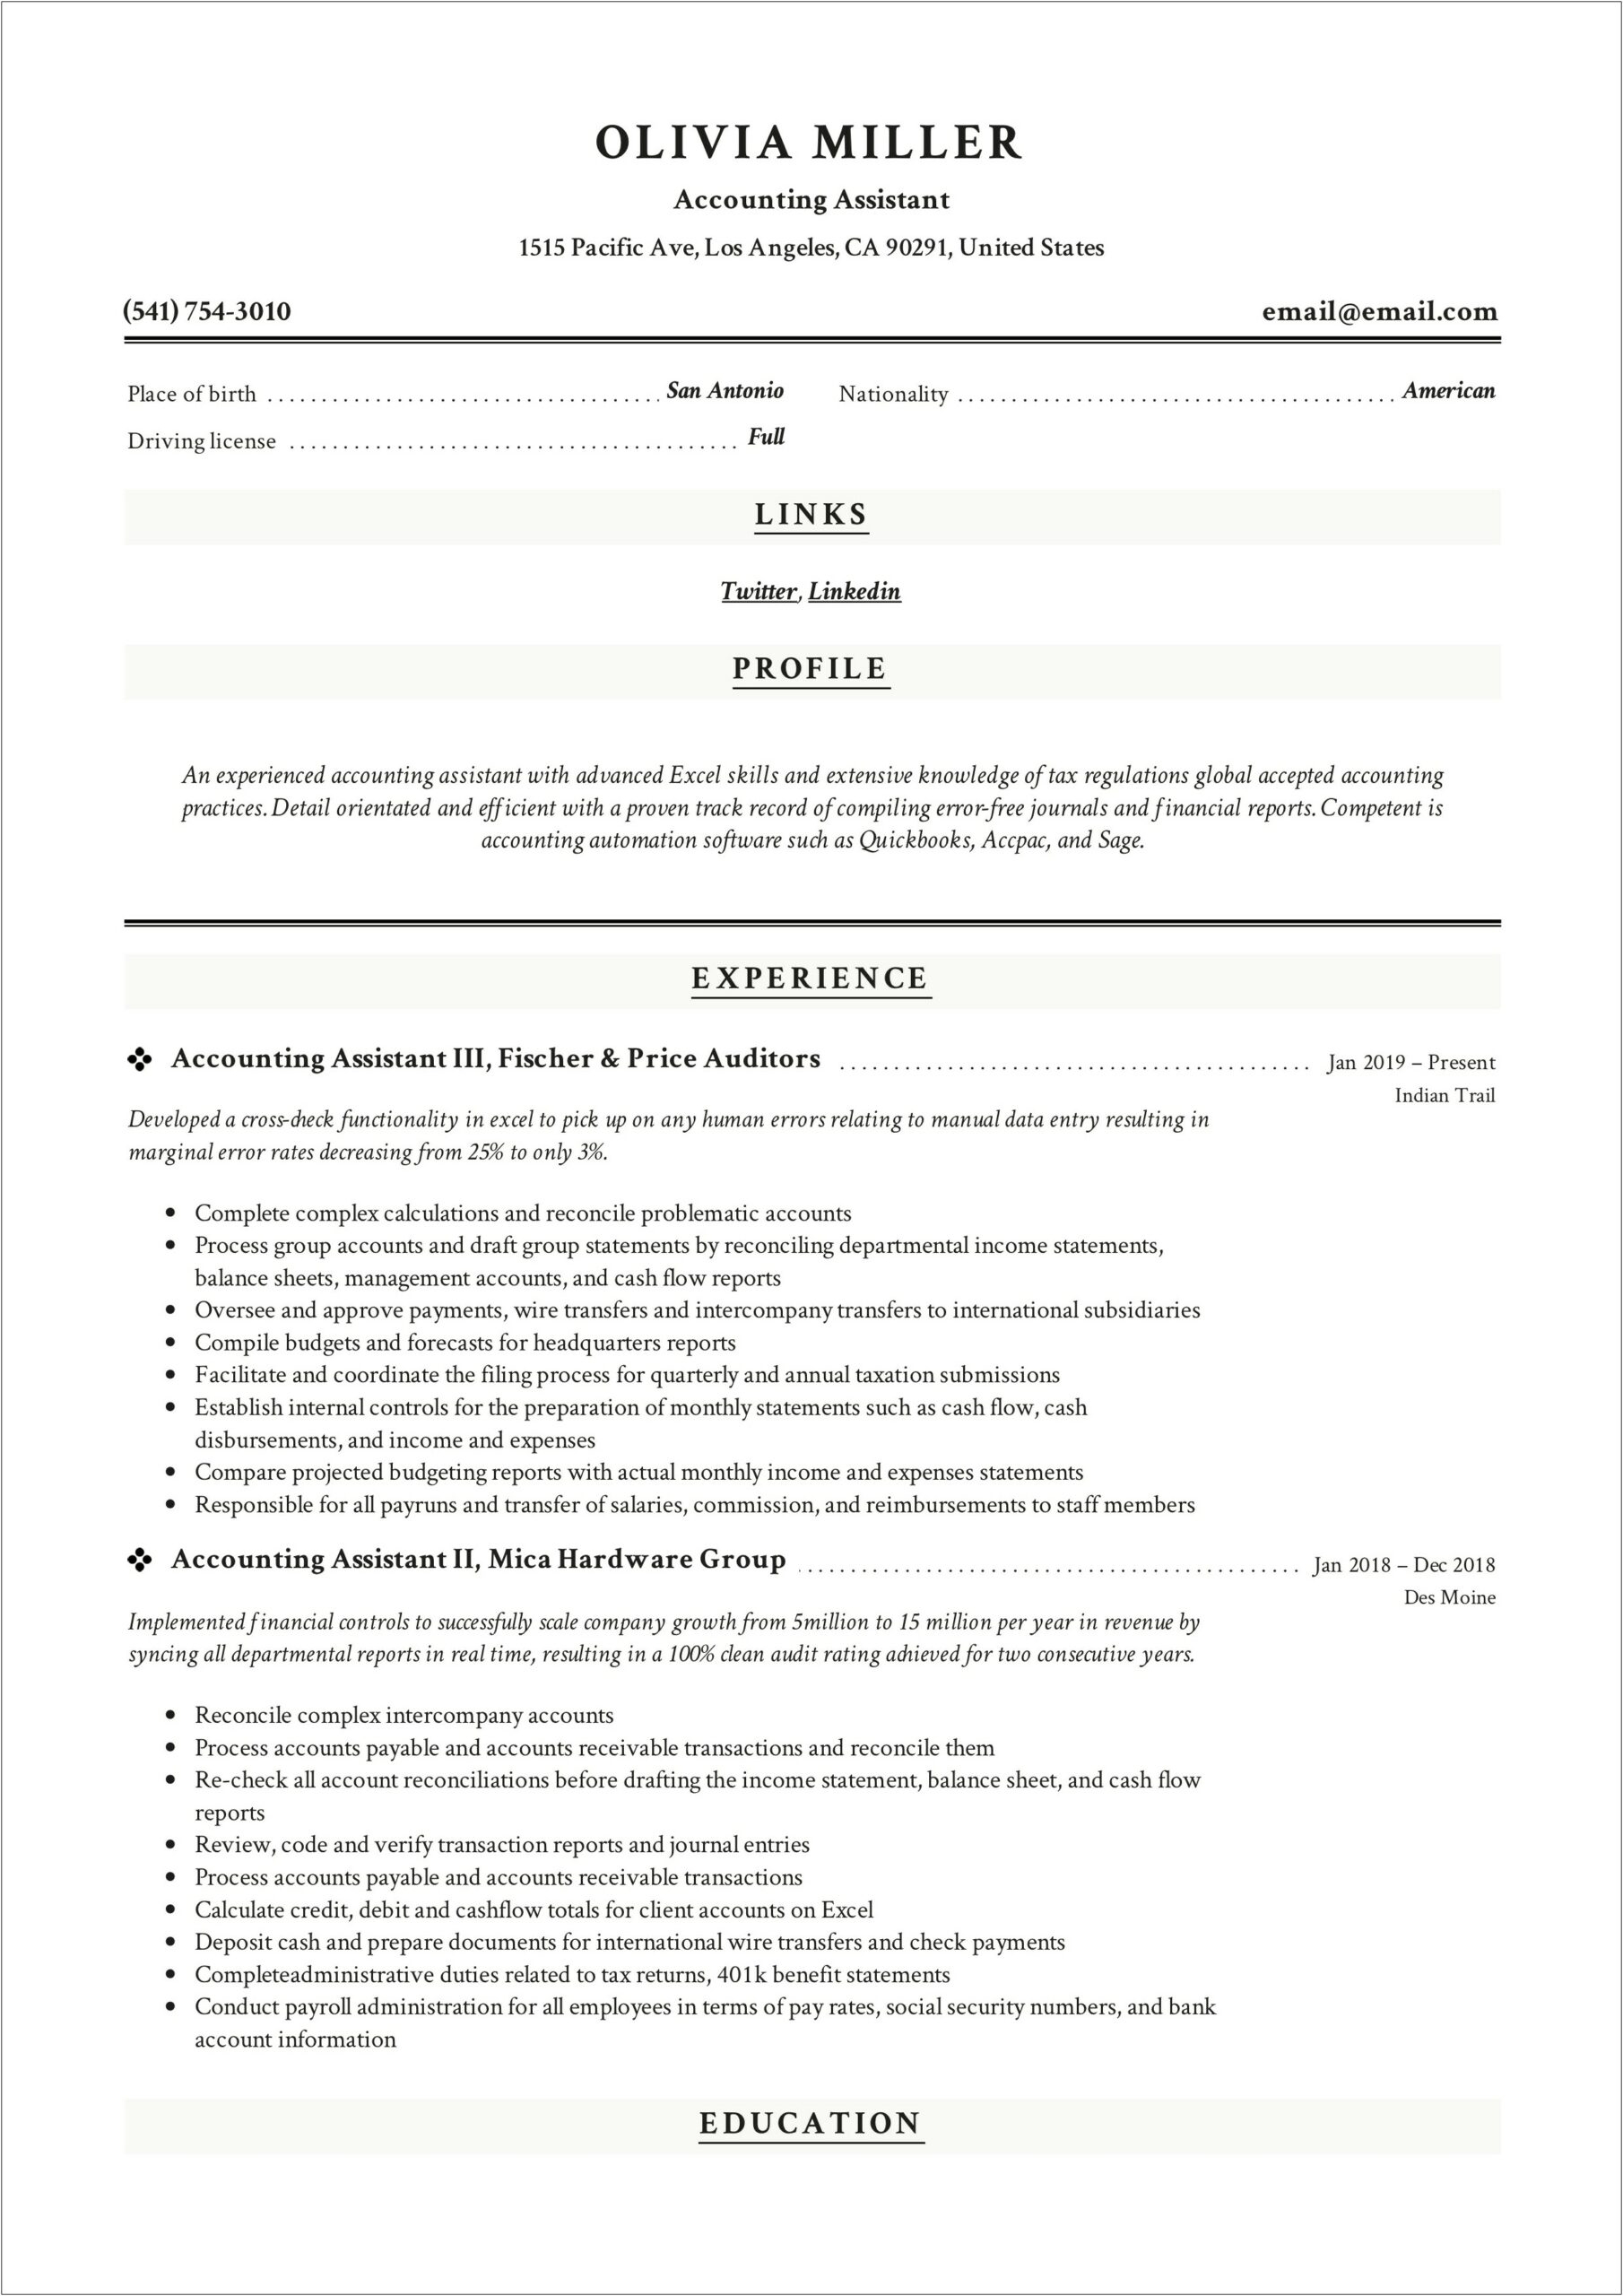 Resume Objective For Beginning Accounting